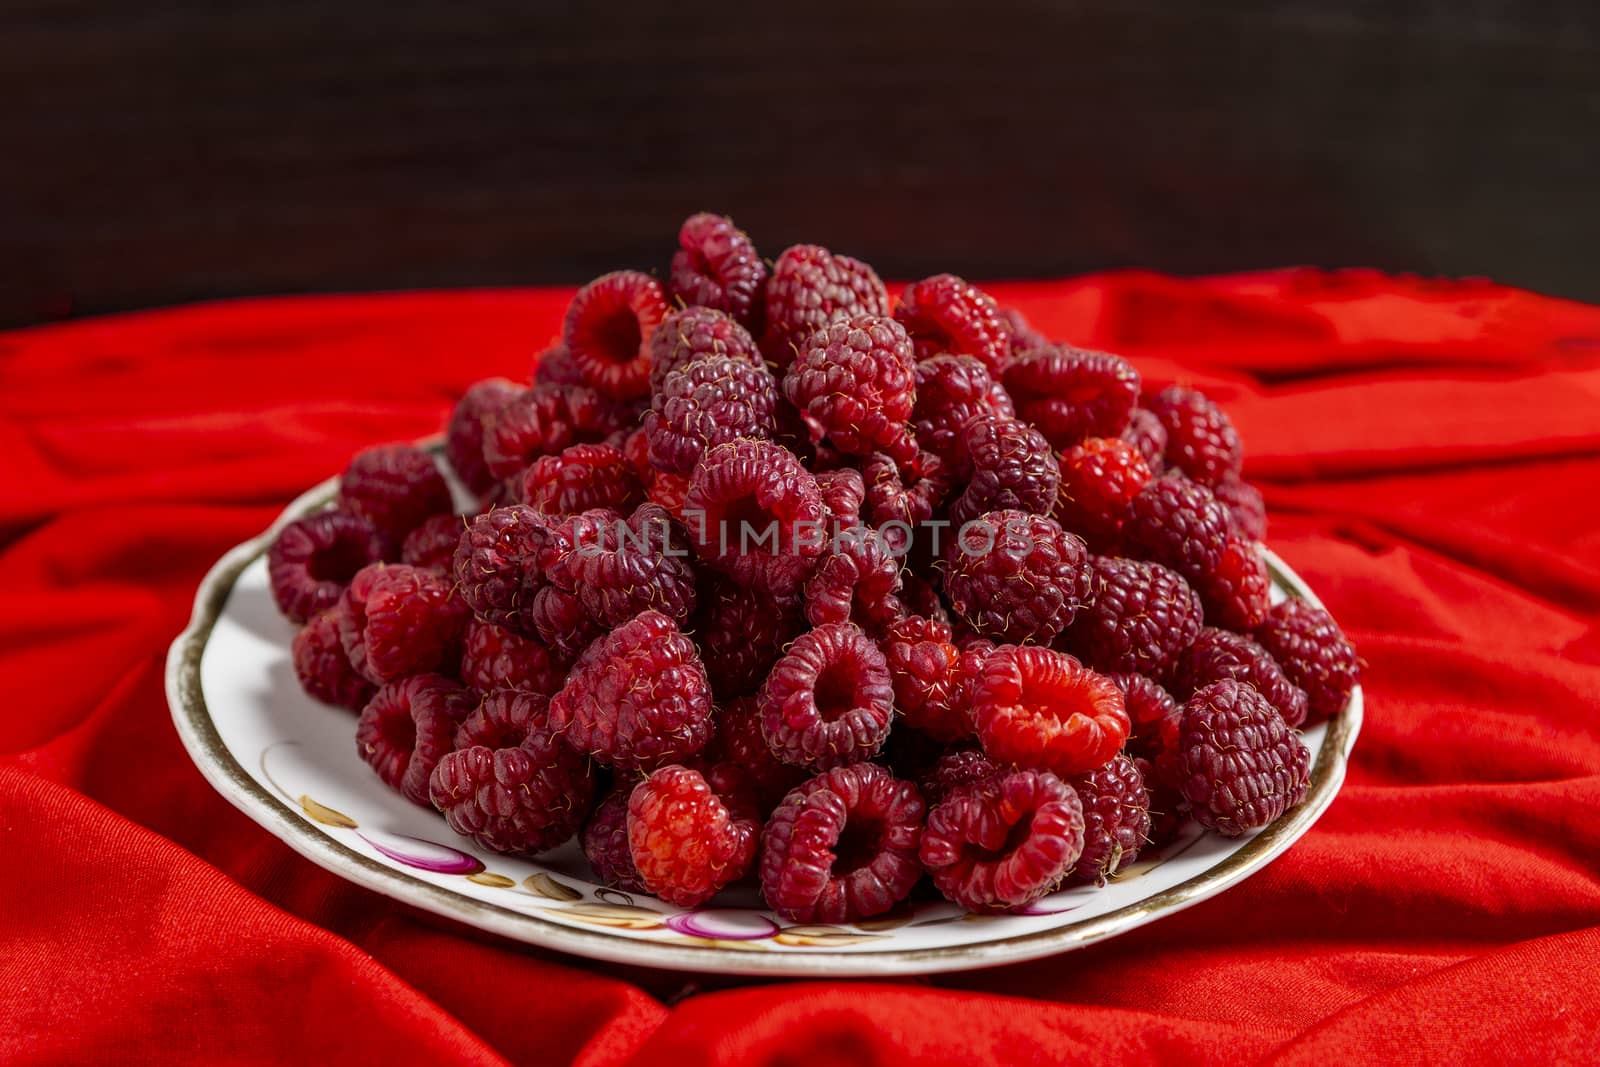 Fresh raspberries on a plate against a red background by ben44